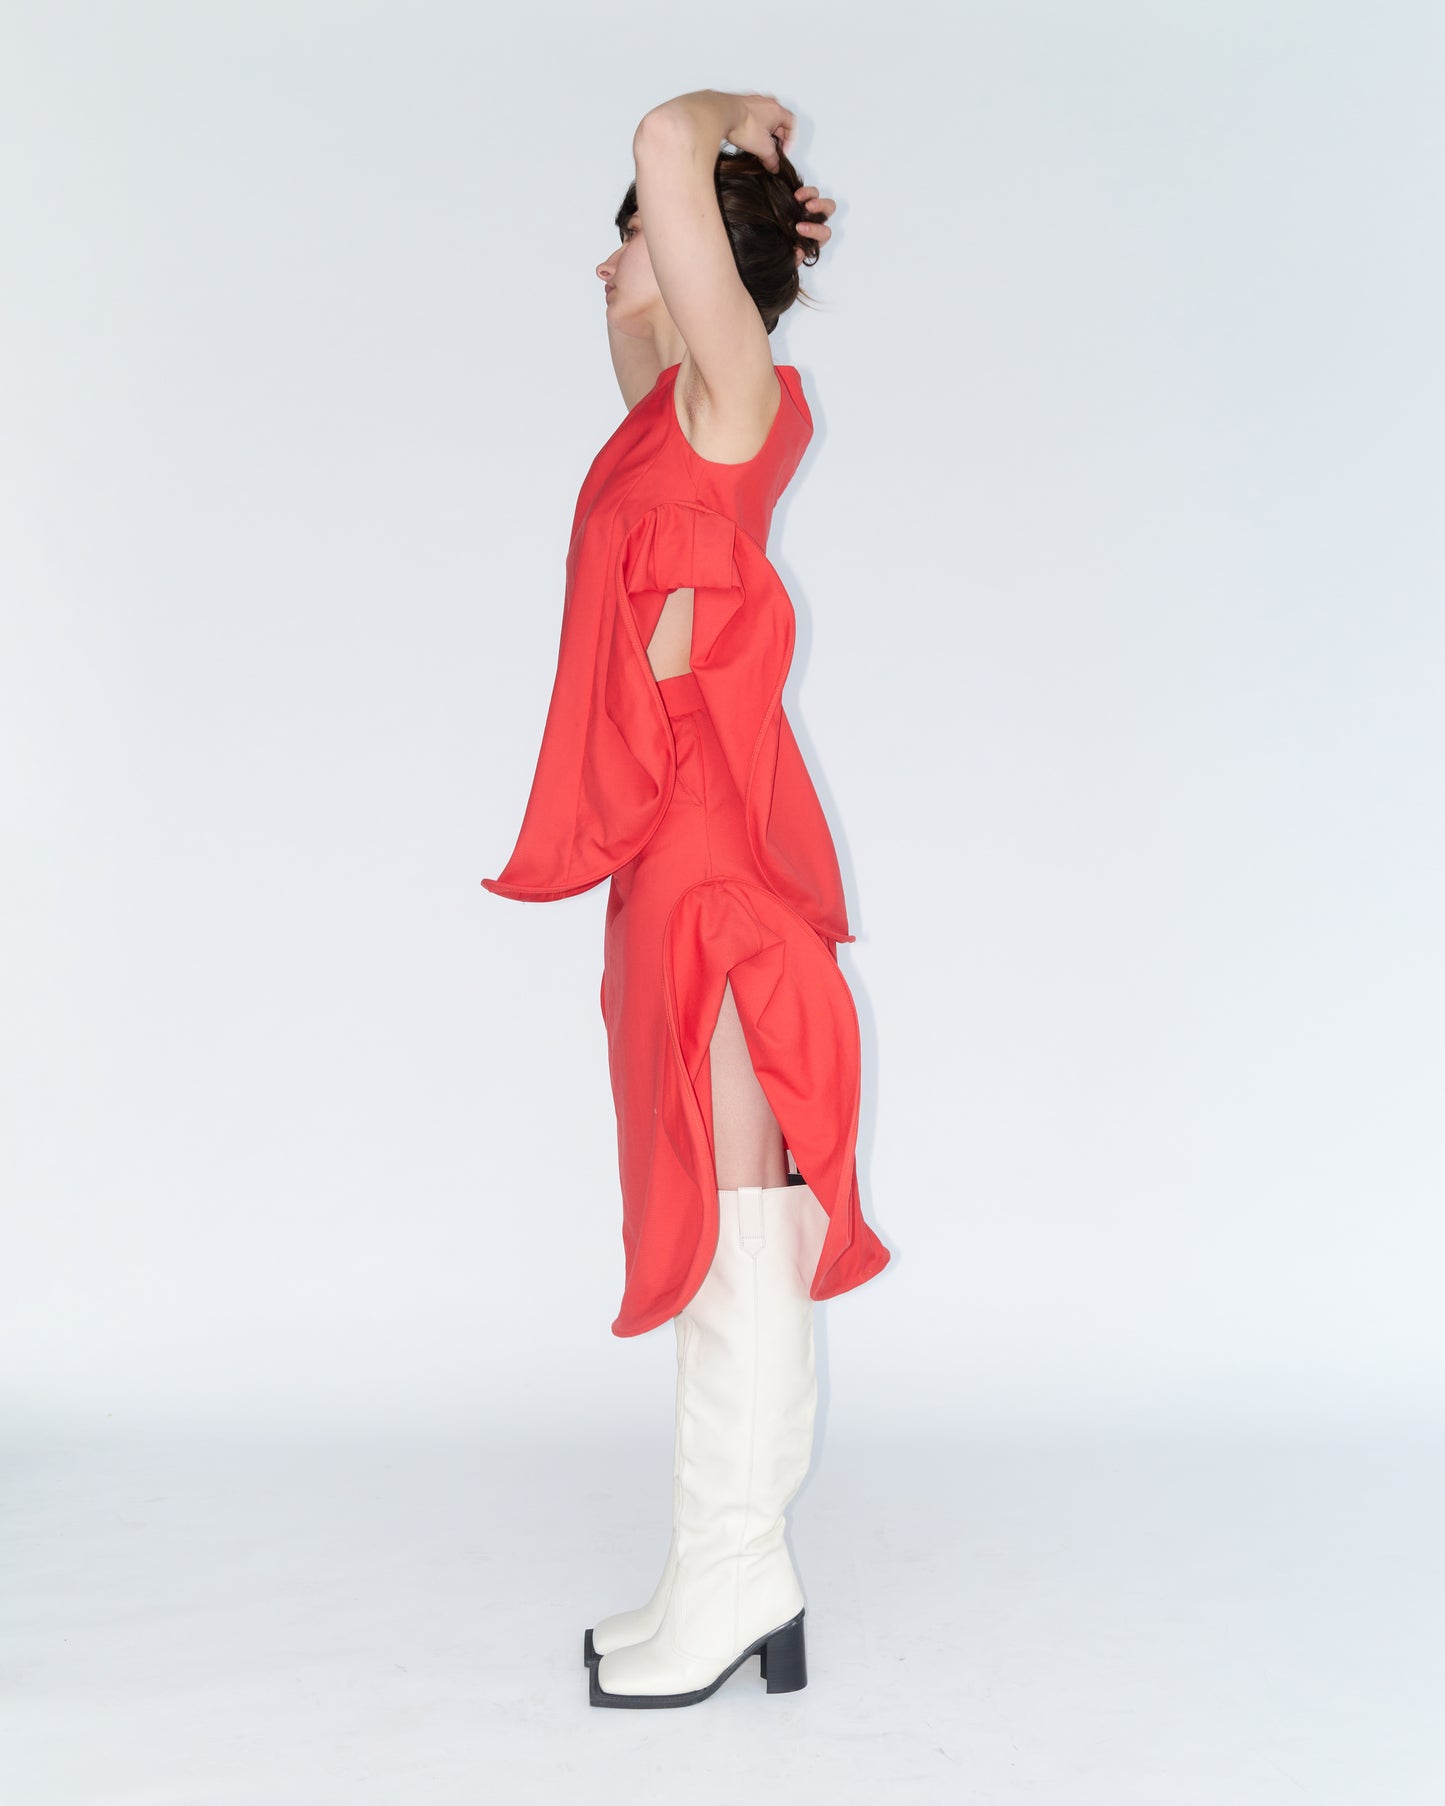 Rhubarb and Skullcap Coral Red Two piece Runway